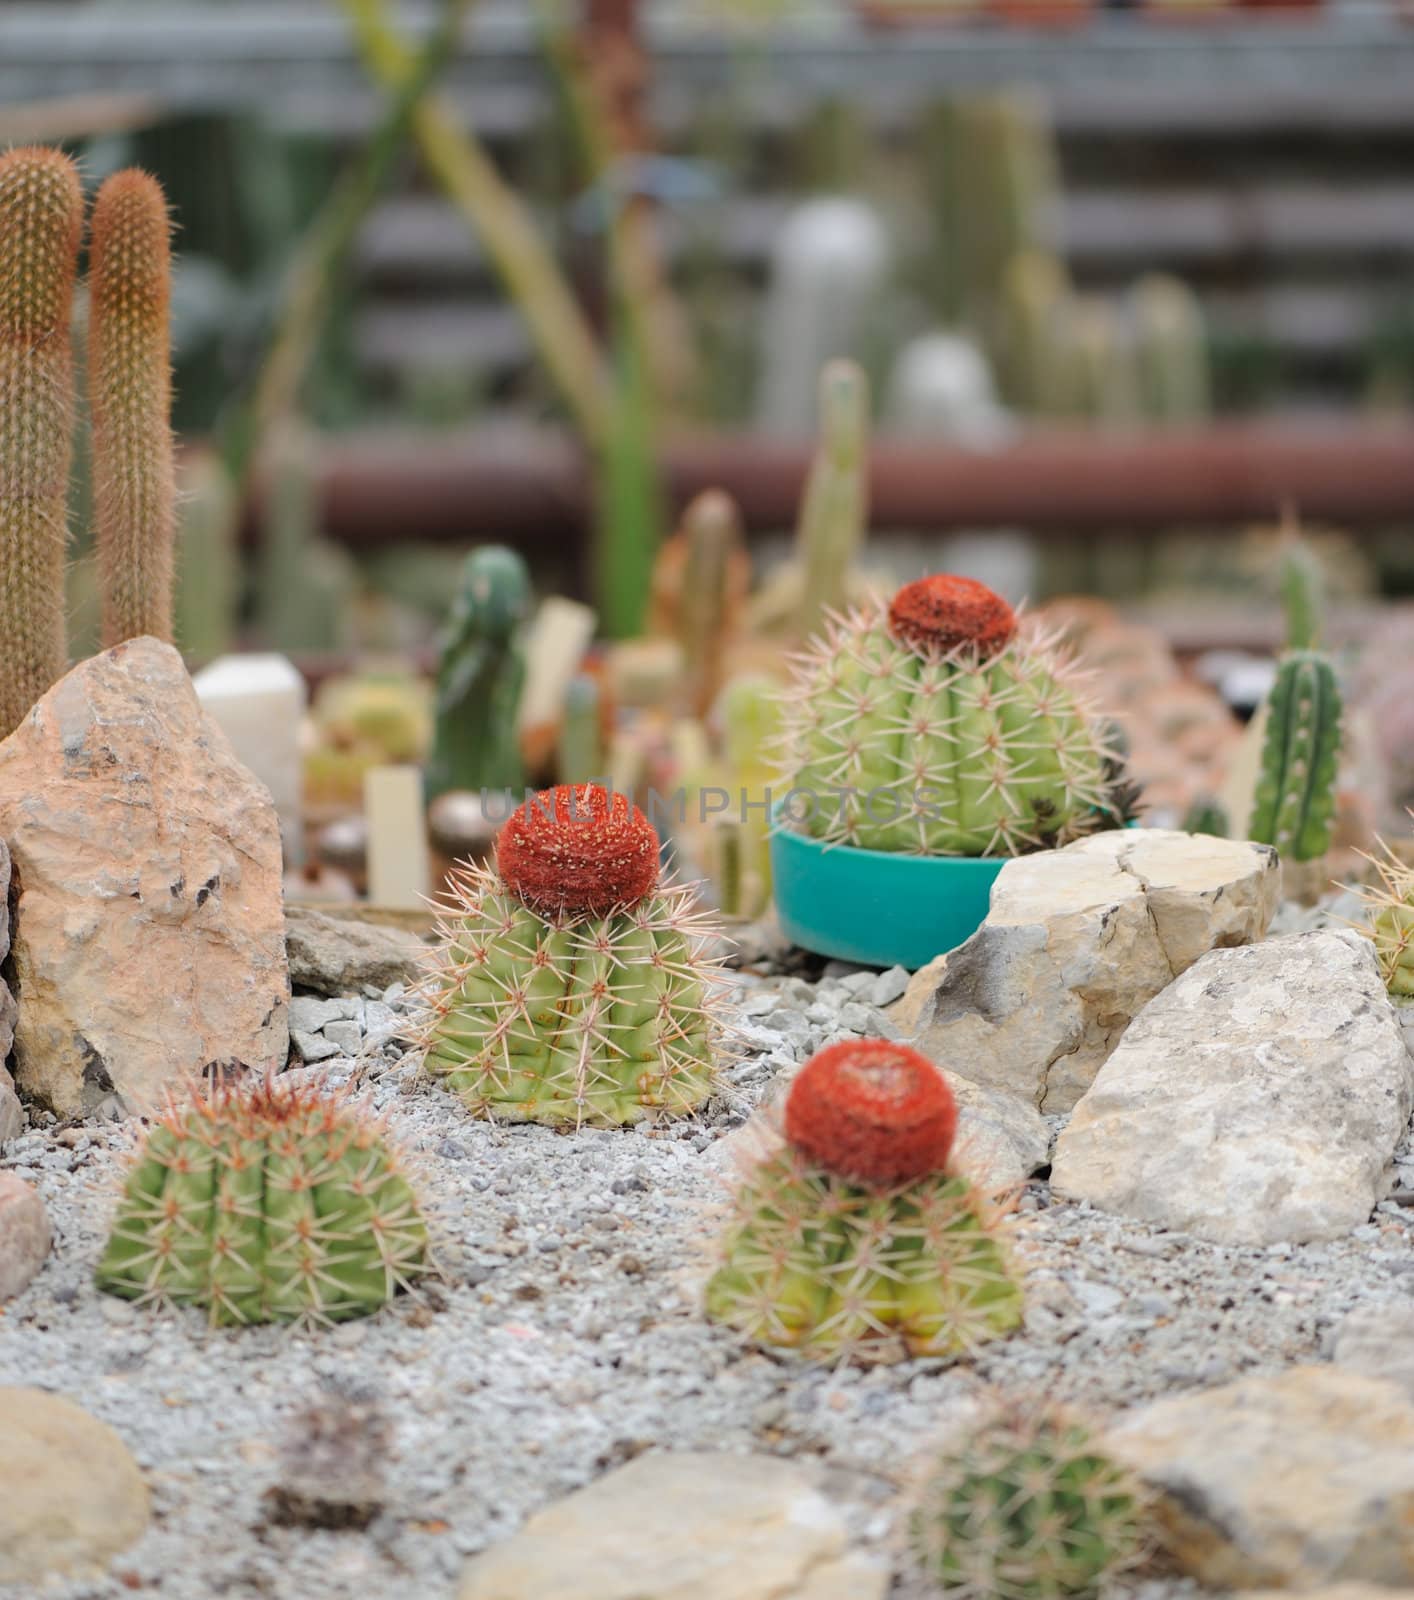 Cactus set. Type of spiny succulent plant